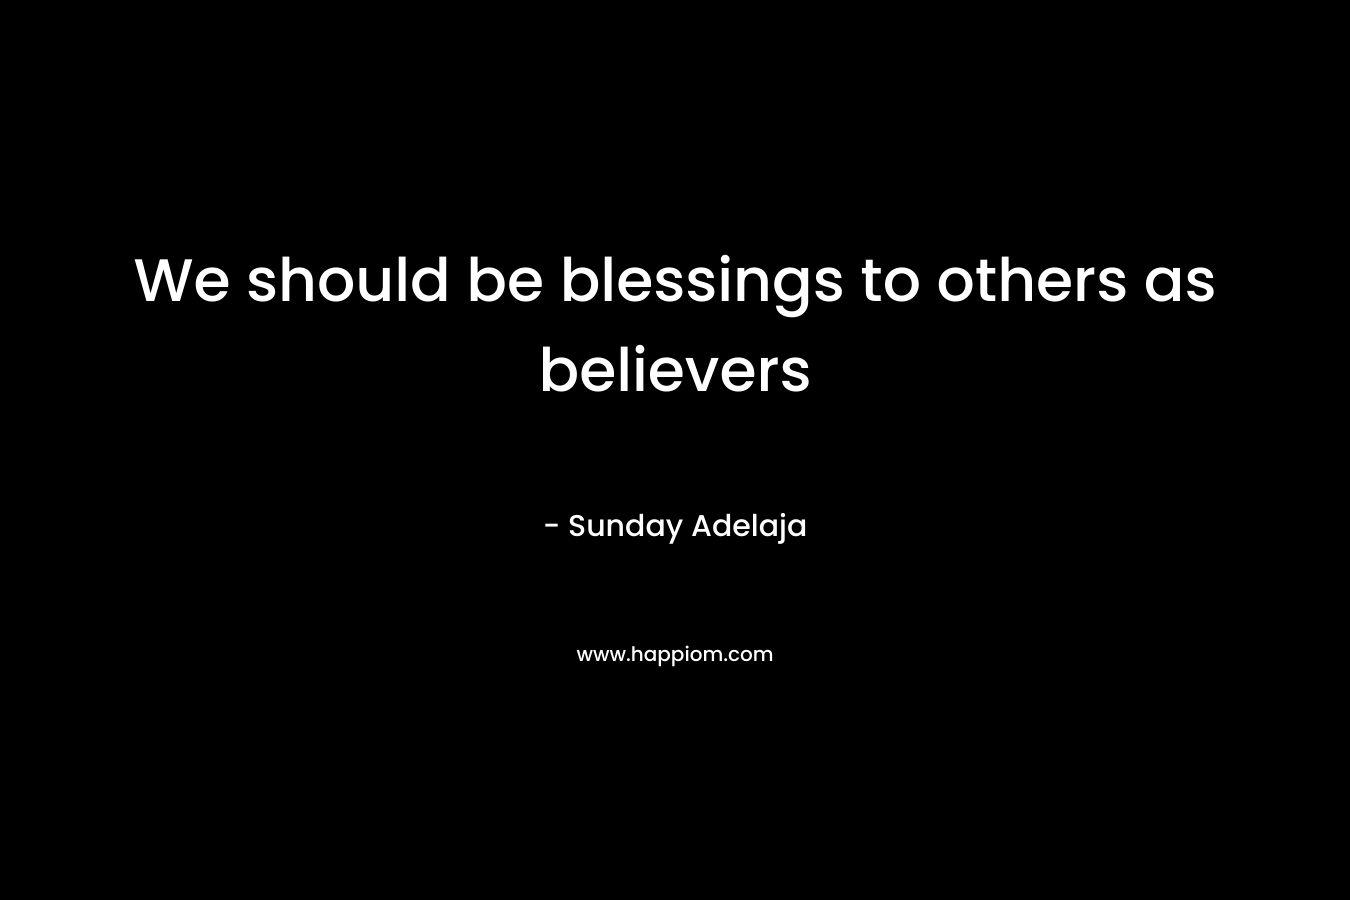 We should be blessings to others as believers